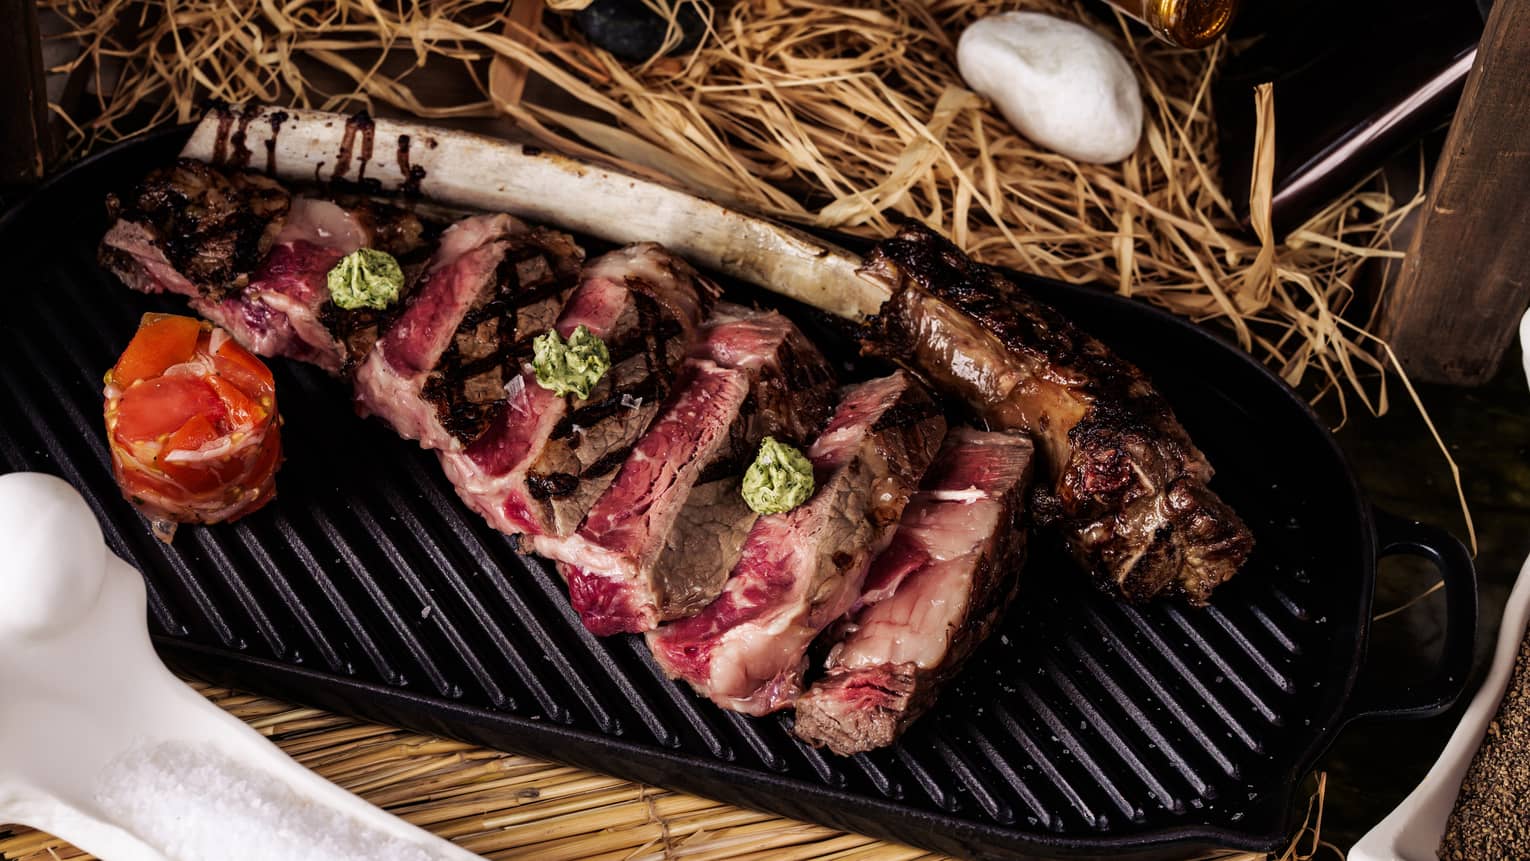 A sliced tomahawk steak with the bone next to it sits on a black griddle-style platter